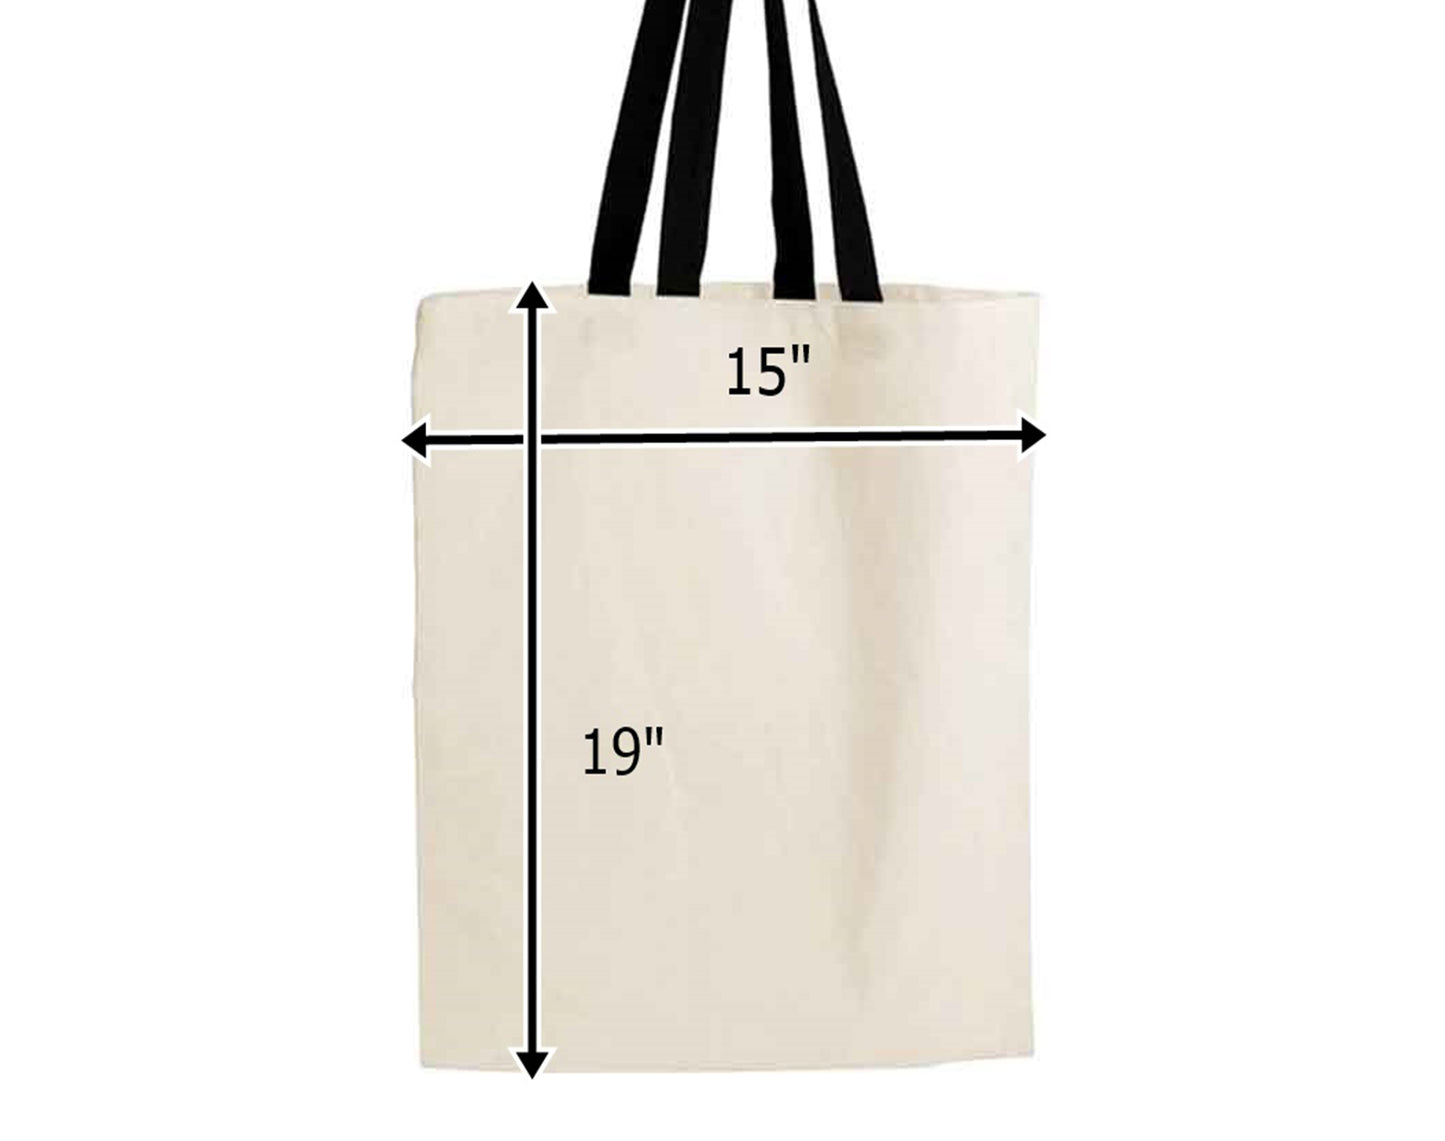 The Lone Ranger Tote Bag